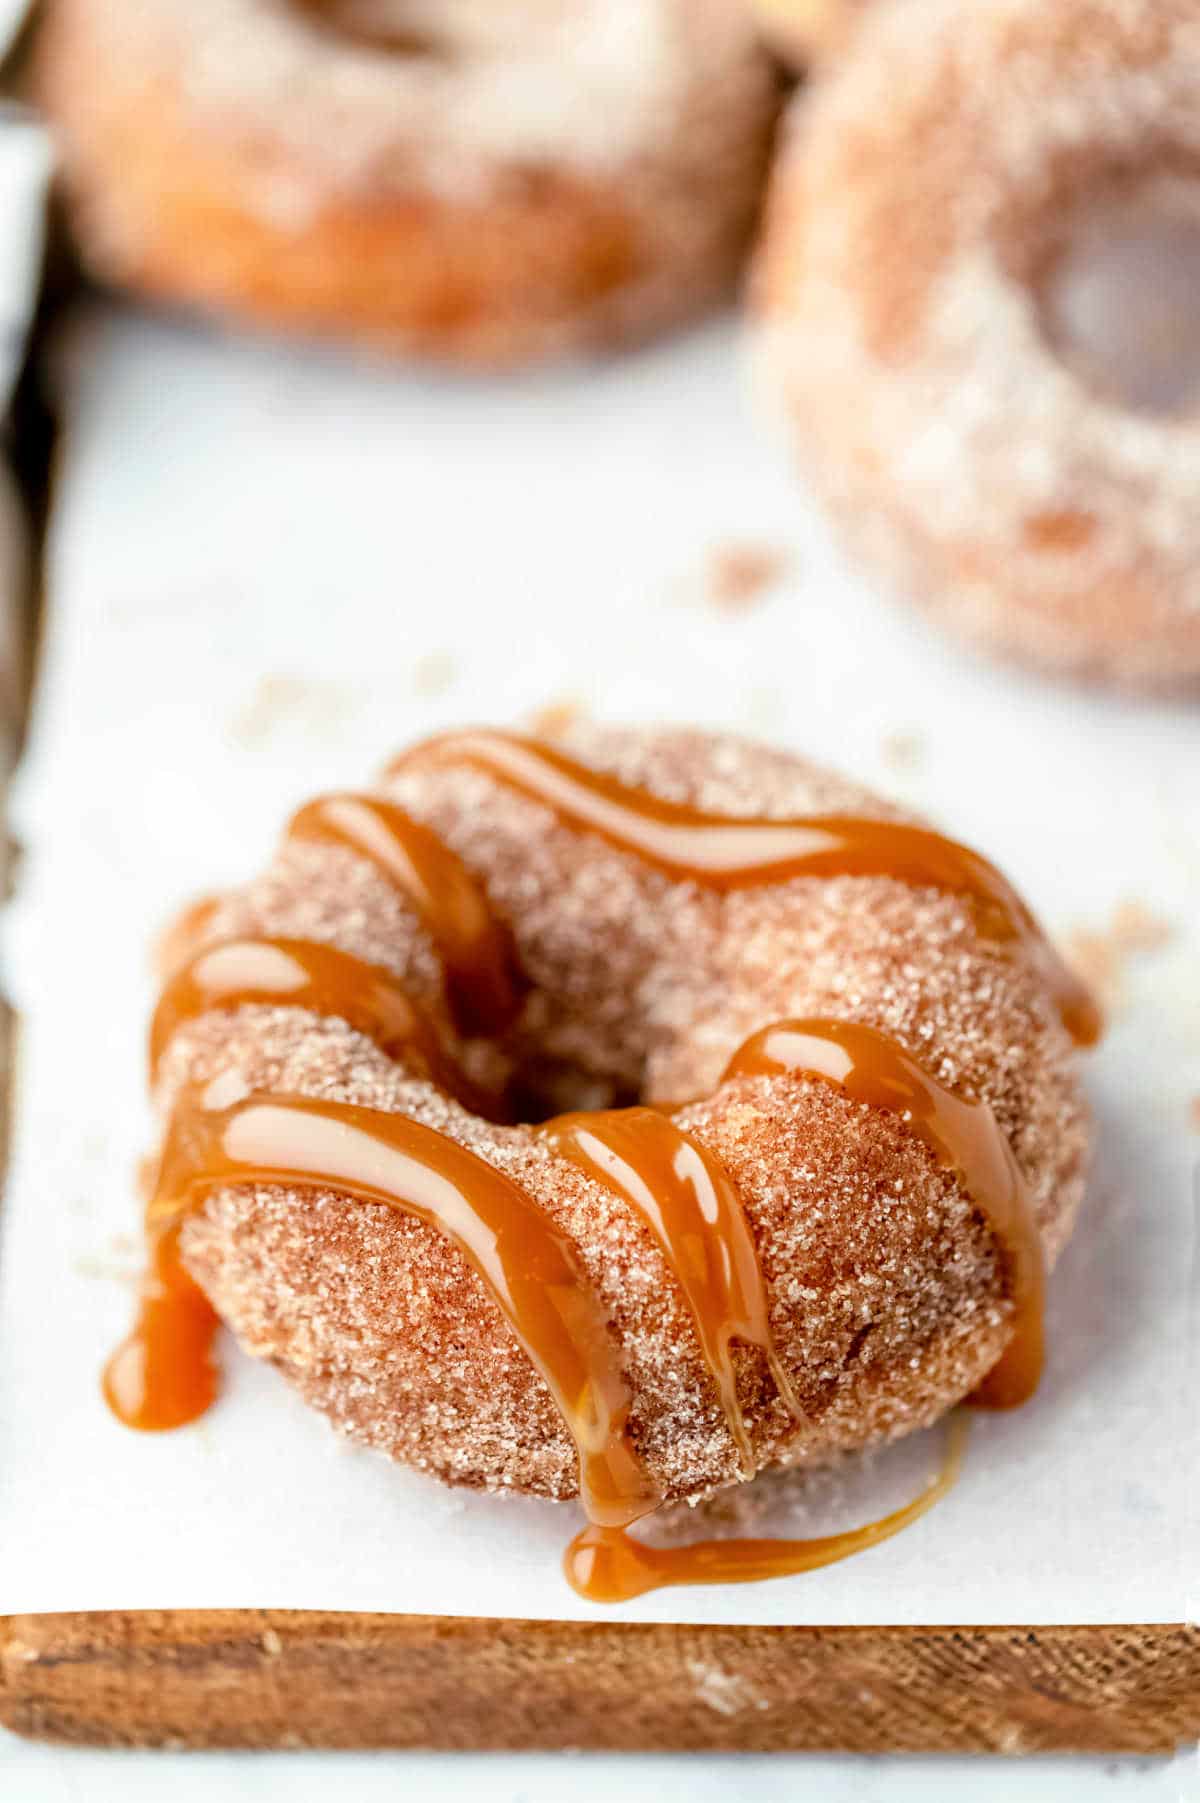 Churro donut with caramel drizzle on parchment paper.